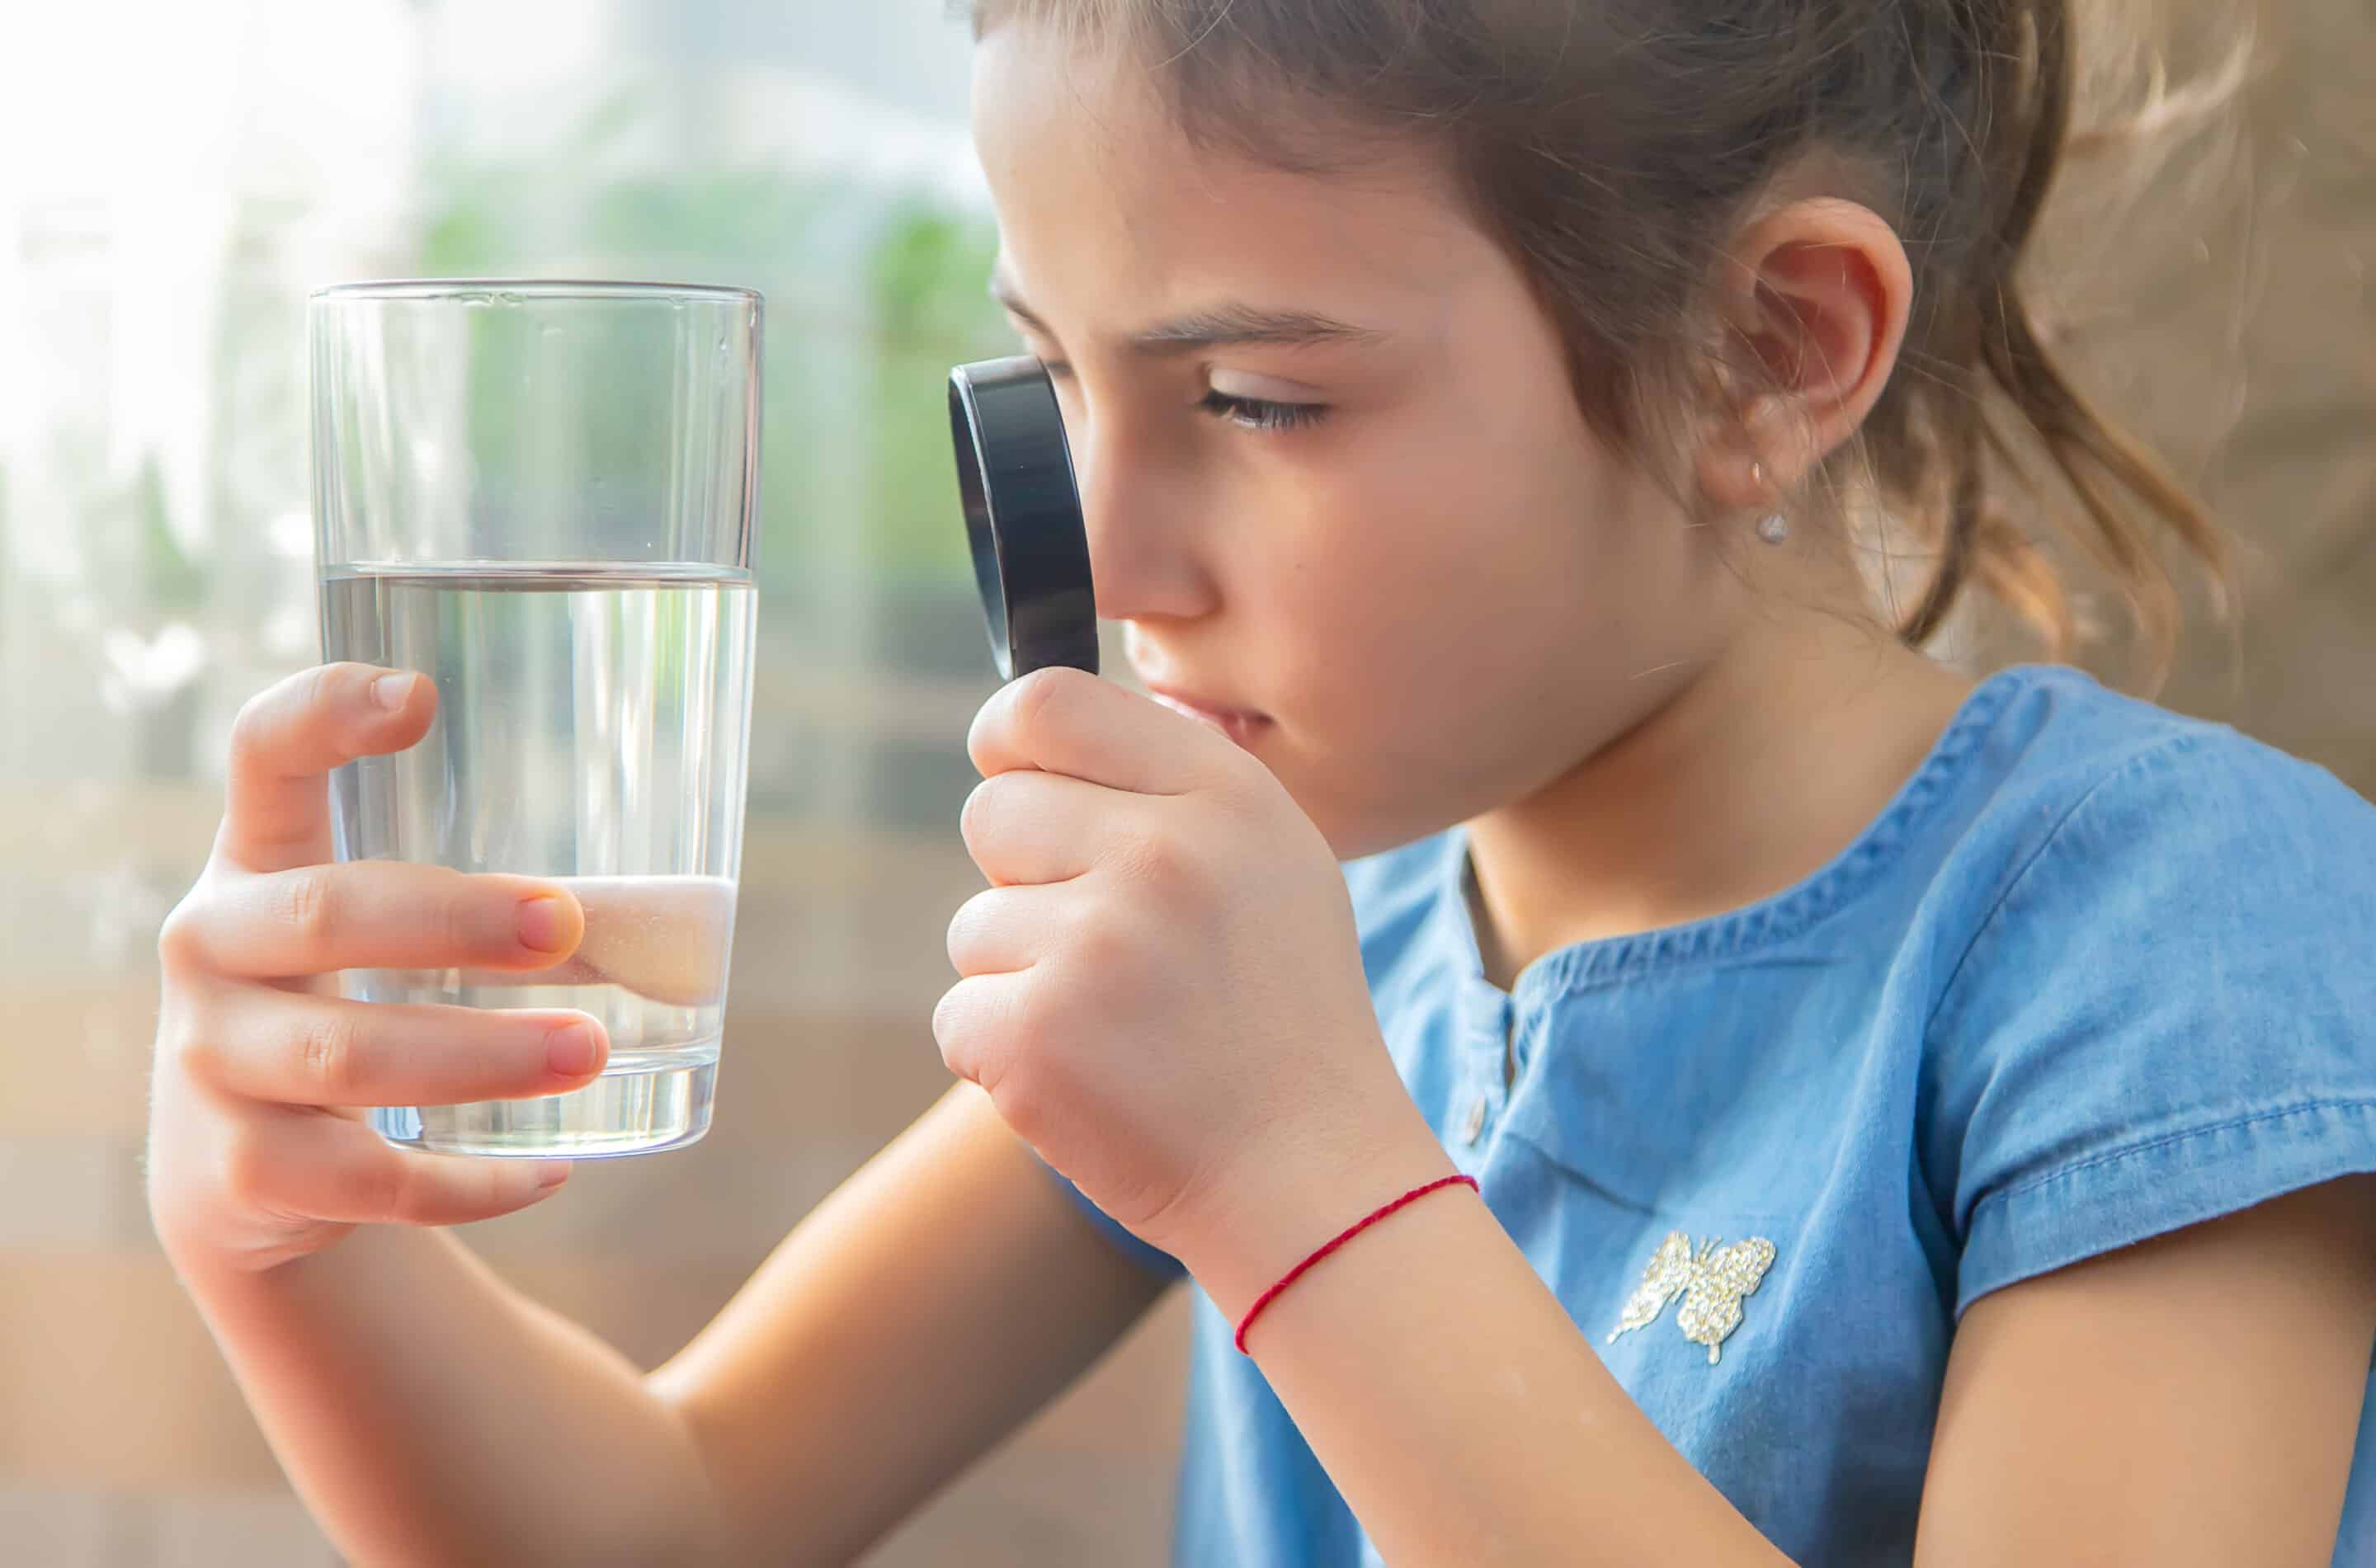 Girl inspecting glass of drinking water through microscope; radon in water poses health risks.